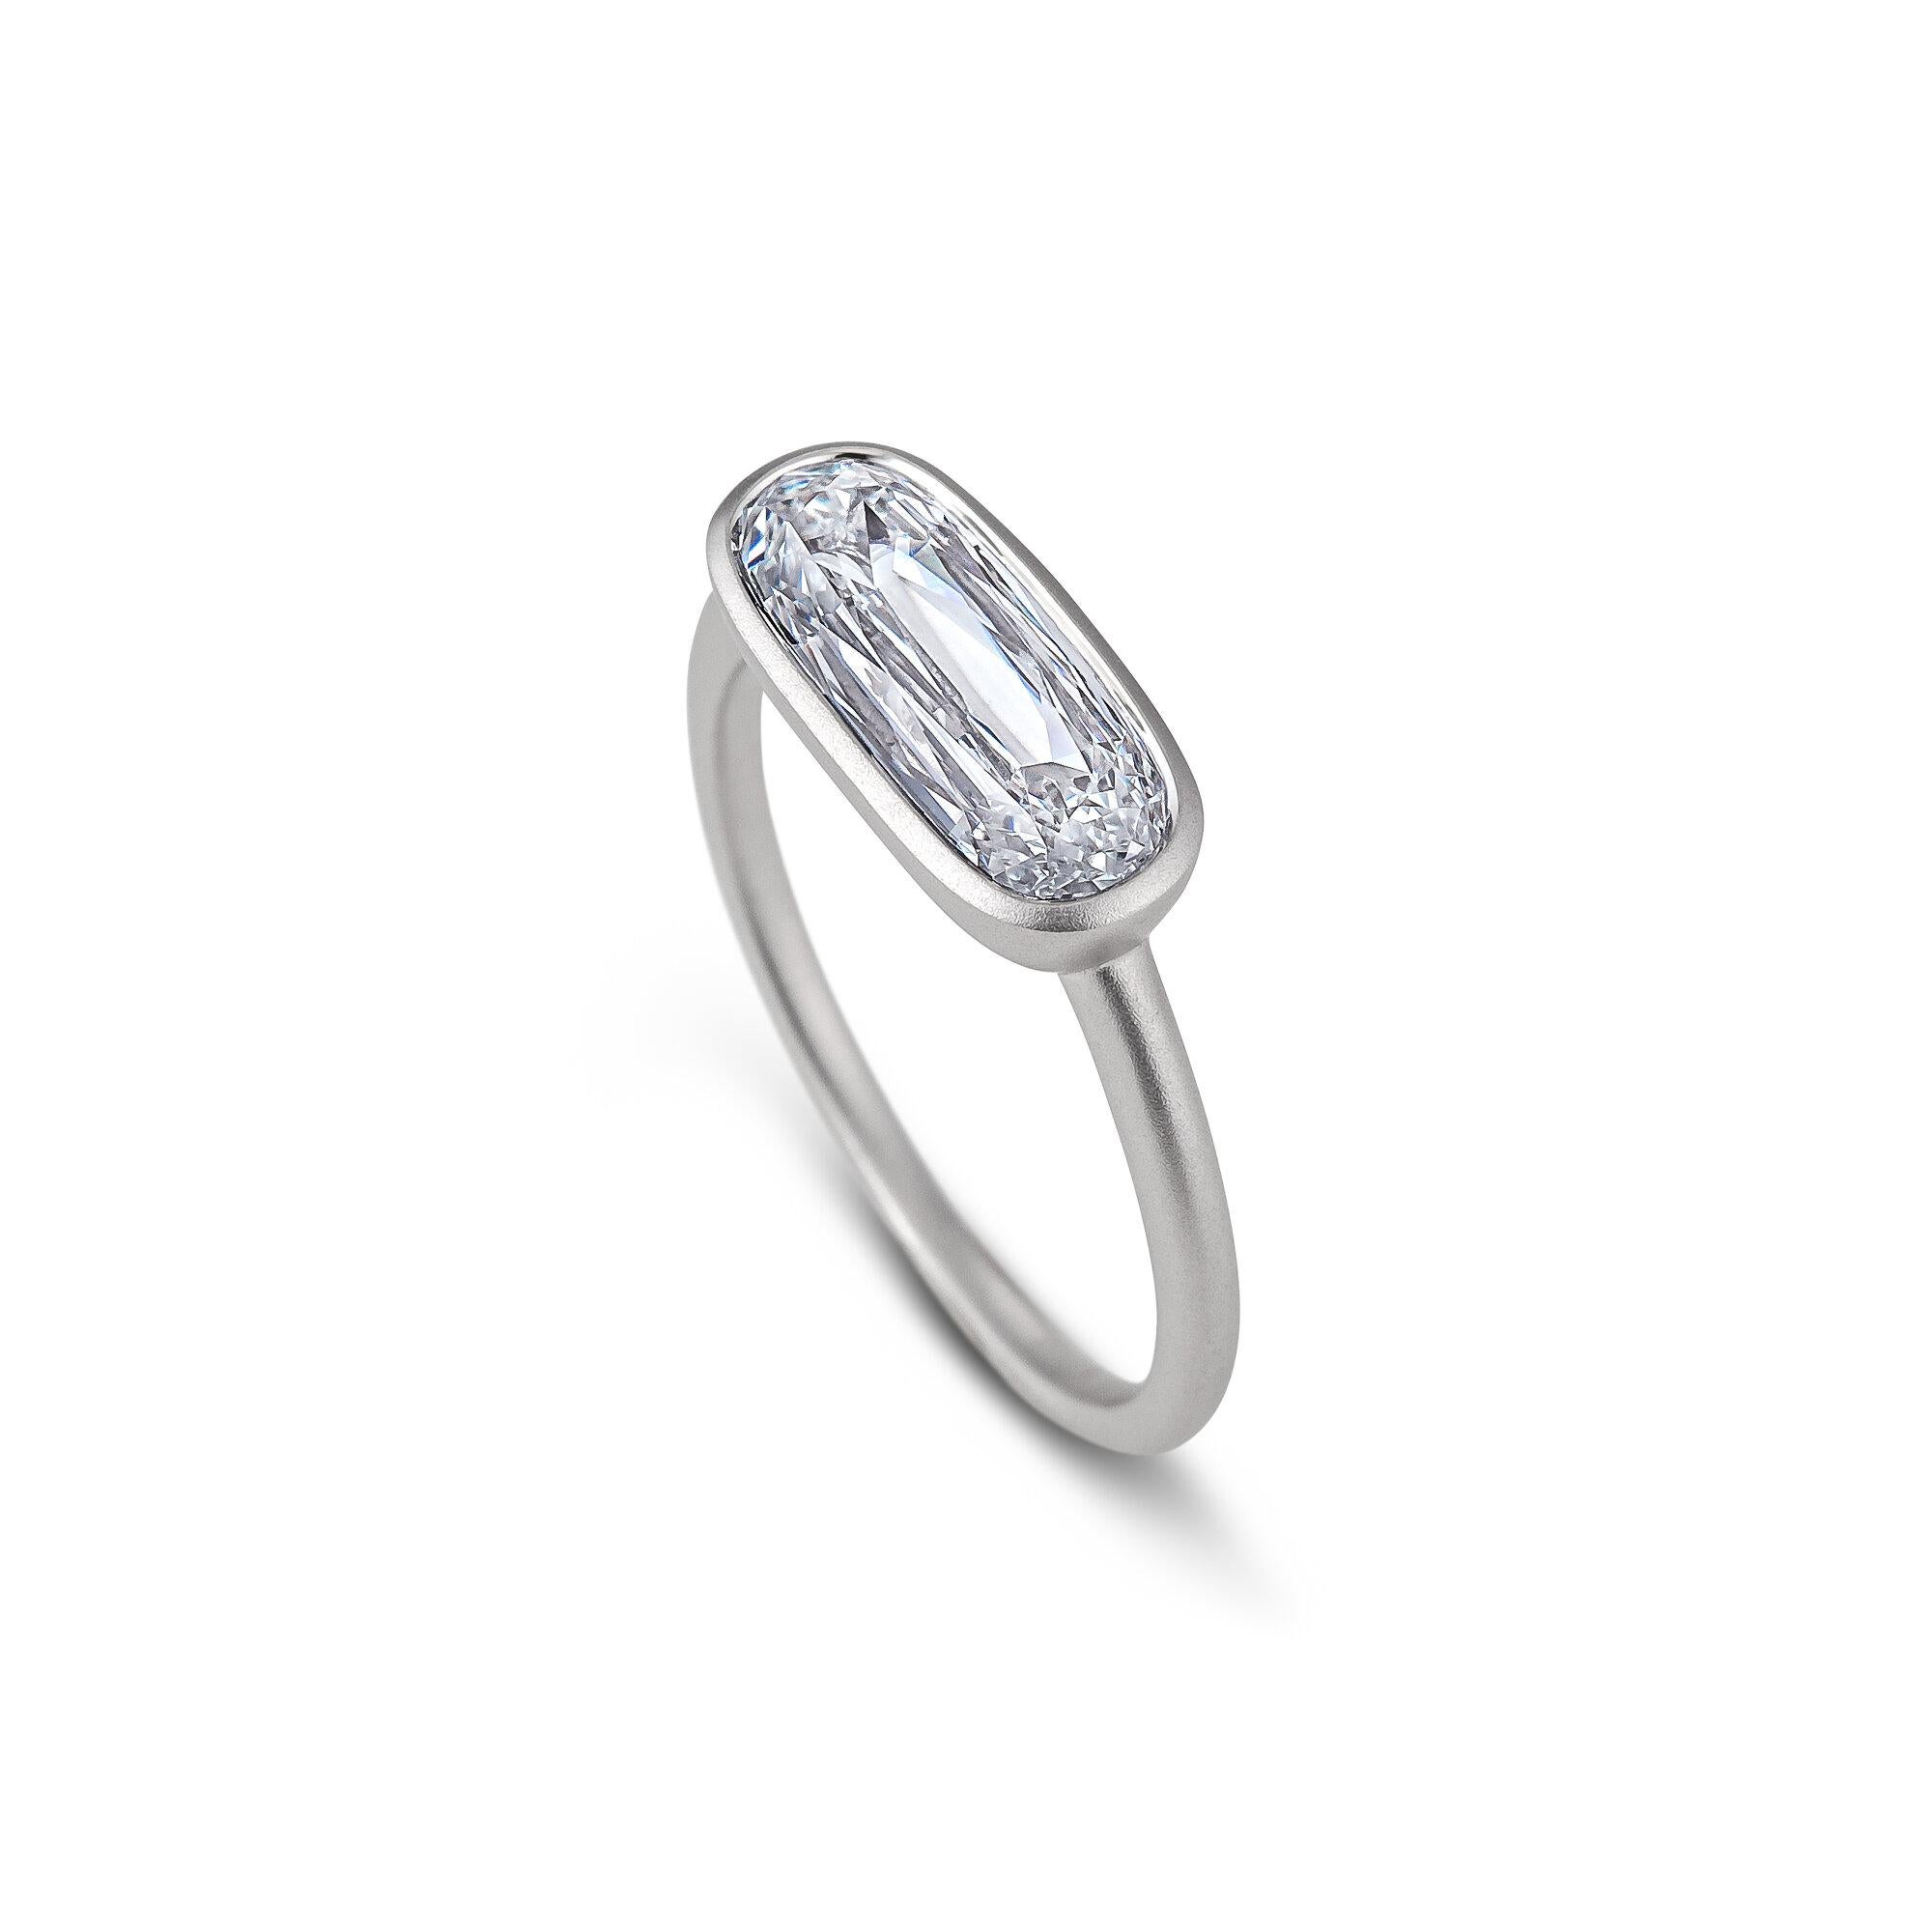 Pointing East to West, this elongated cushion cut 1.75 carat GIA certified diamond engagement ring, designed in a sleek modern bezel setting, is a one-of-a-kind standout from coast to coast.  Diamond color H.  Clarity VS2.  GIA certification